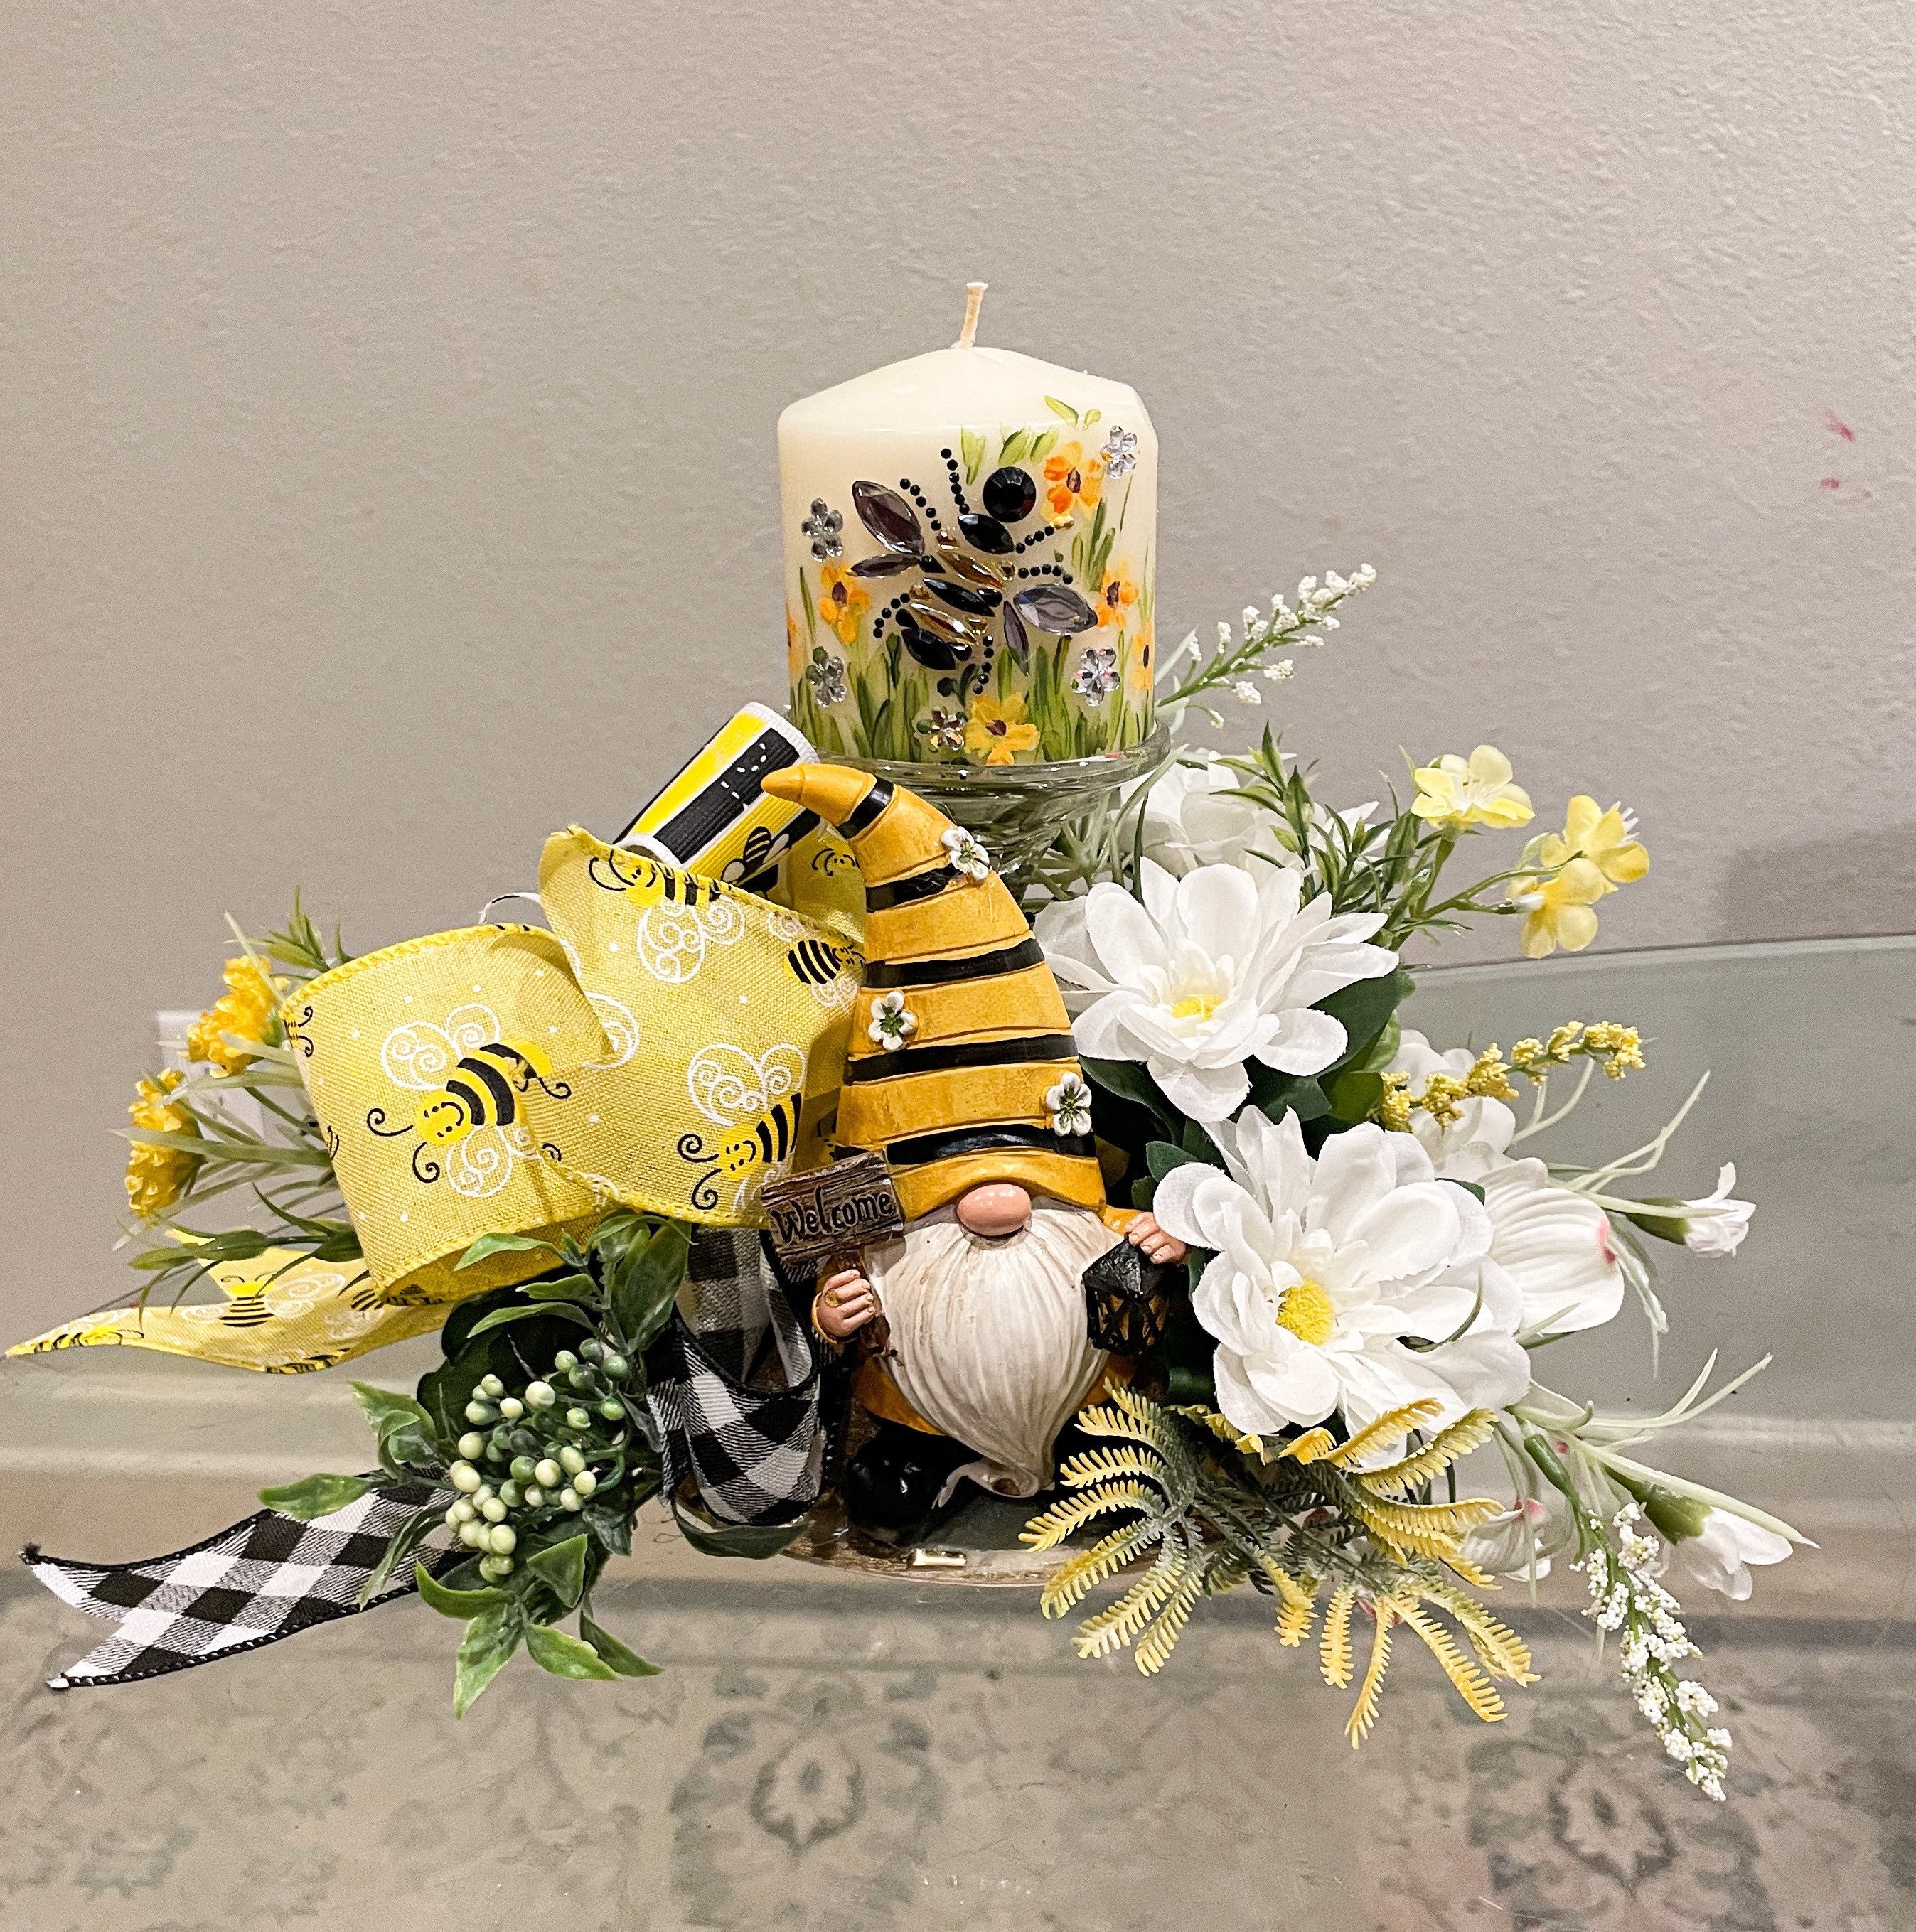 Lnlofen 8Pcs Bumble Bee Birthday Party Decorations Honeycomb Centerpieces,  Happy 1st Bee Day Birthday Themed Table Centerpiece Toppers Party Supplies